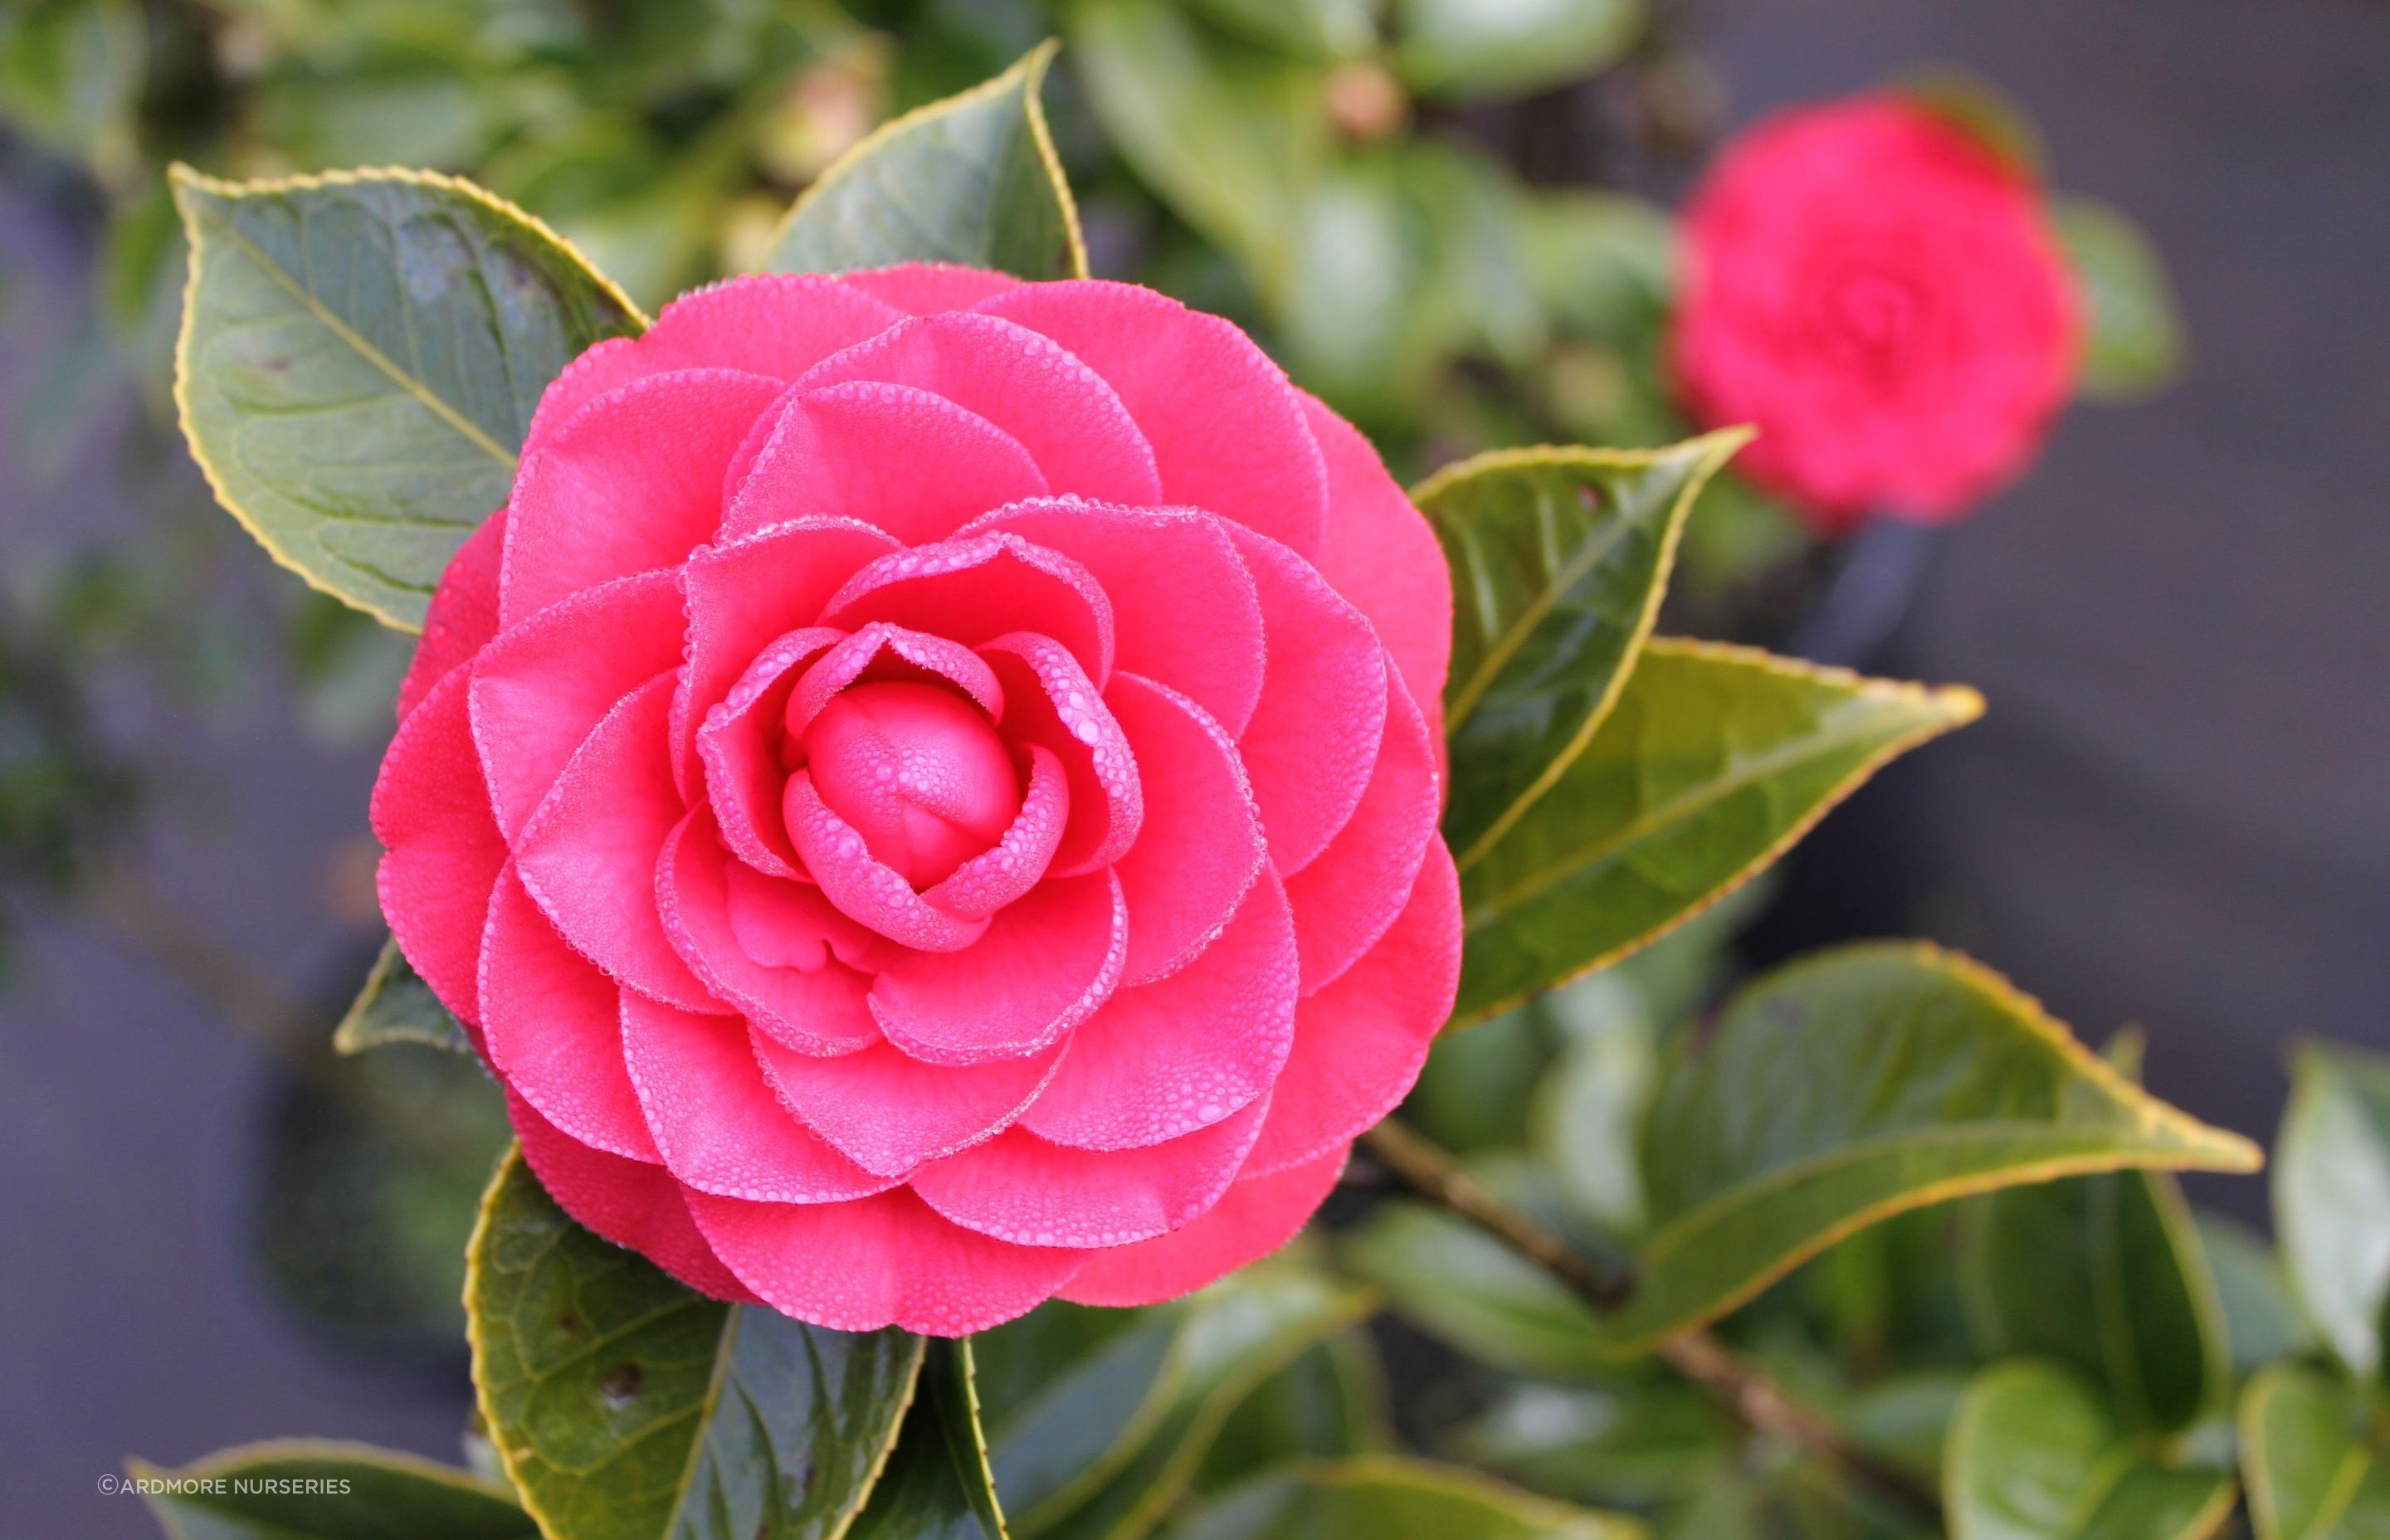 A wonderful example of the vibrancy that a flowering Camellia can bring, seen here with the Camellia Japonica 'Roger Hall'.